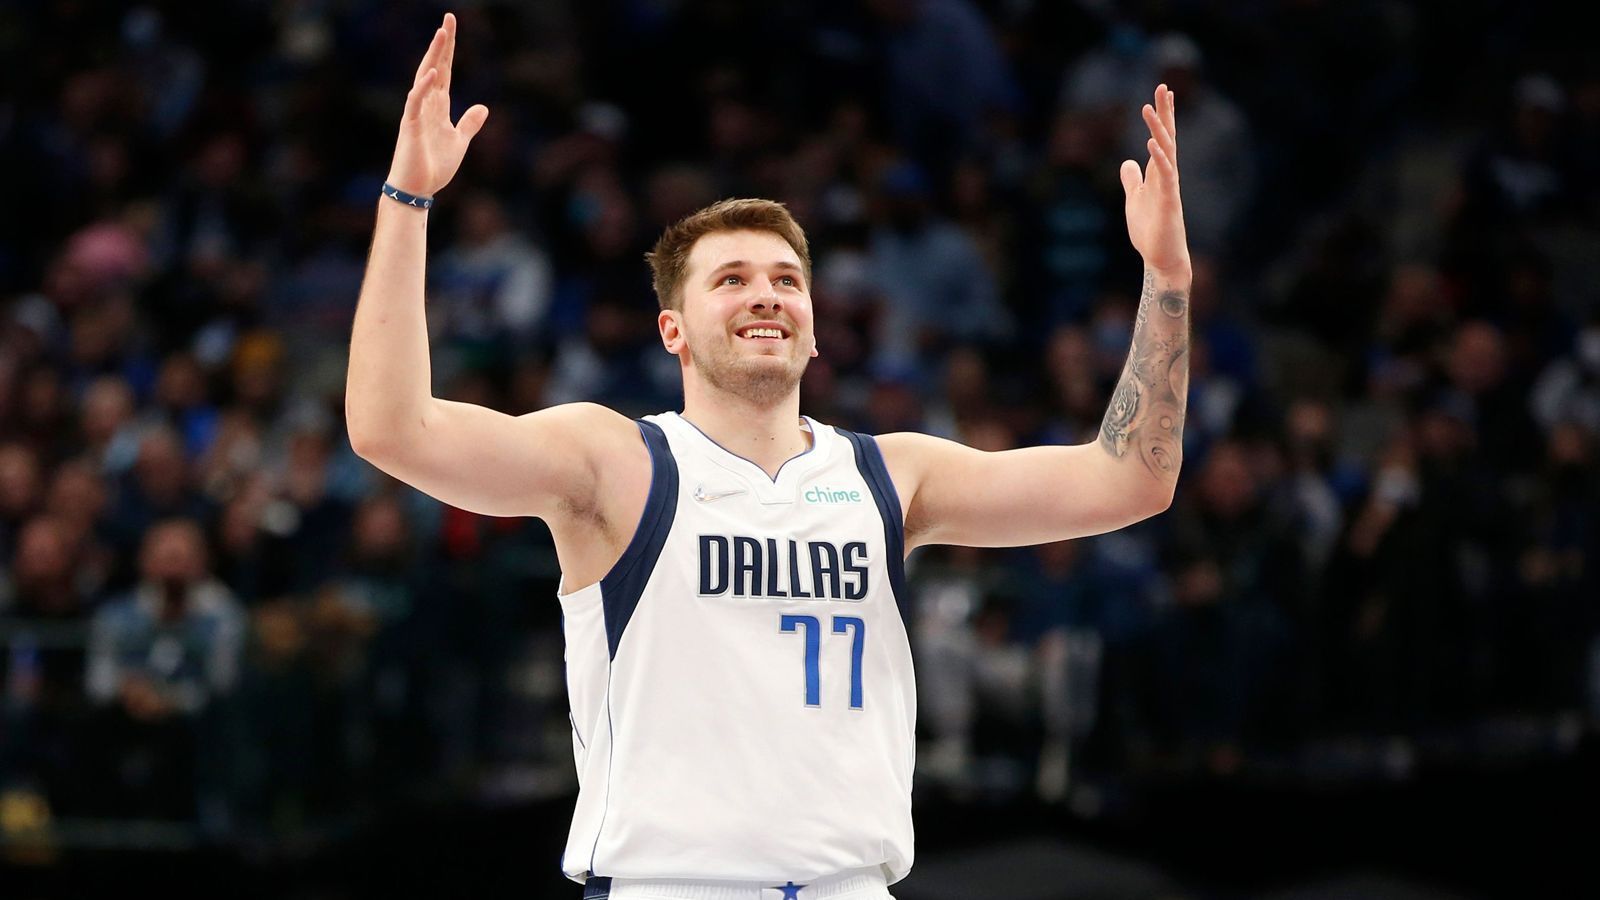 
                <strong>Luka Doncic (Dallas Mavericks/Reserve)</strong><br>
                &#x2022; Punkte: 27,2 -<br>&#x2022; Rebounds: 9,0 -<br>&#x2022; Assists: 9,1 -<br>&#x2022; All-Star Nominierungen: 3. <br>
              